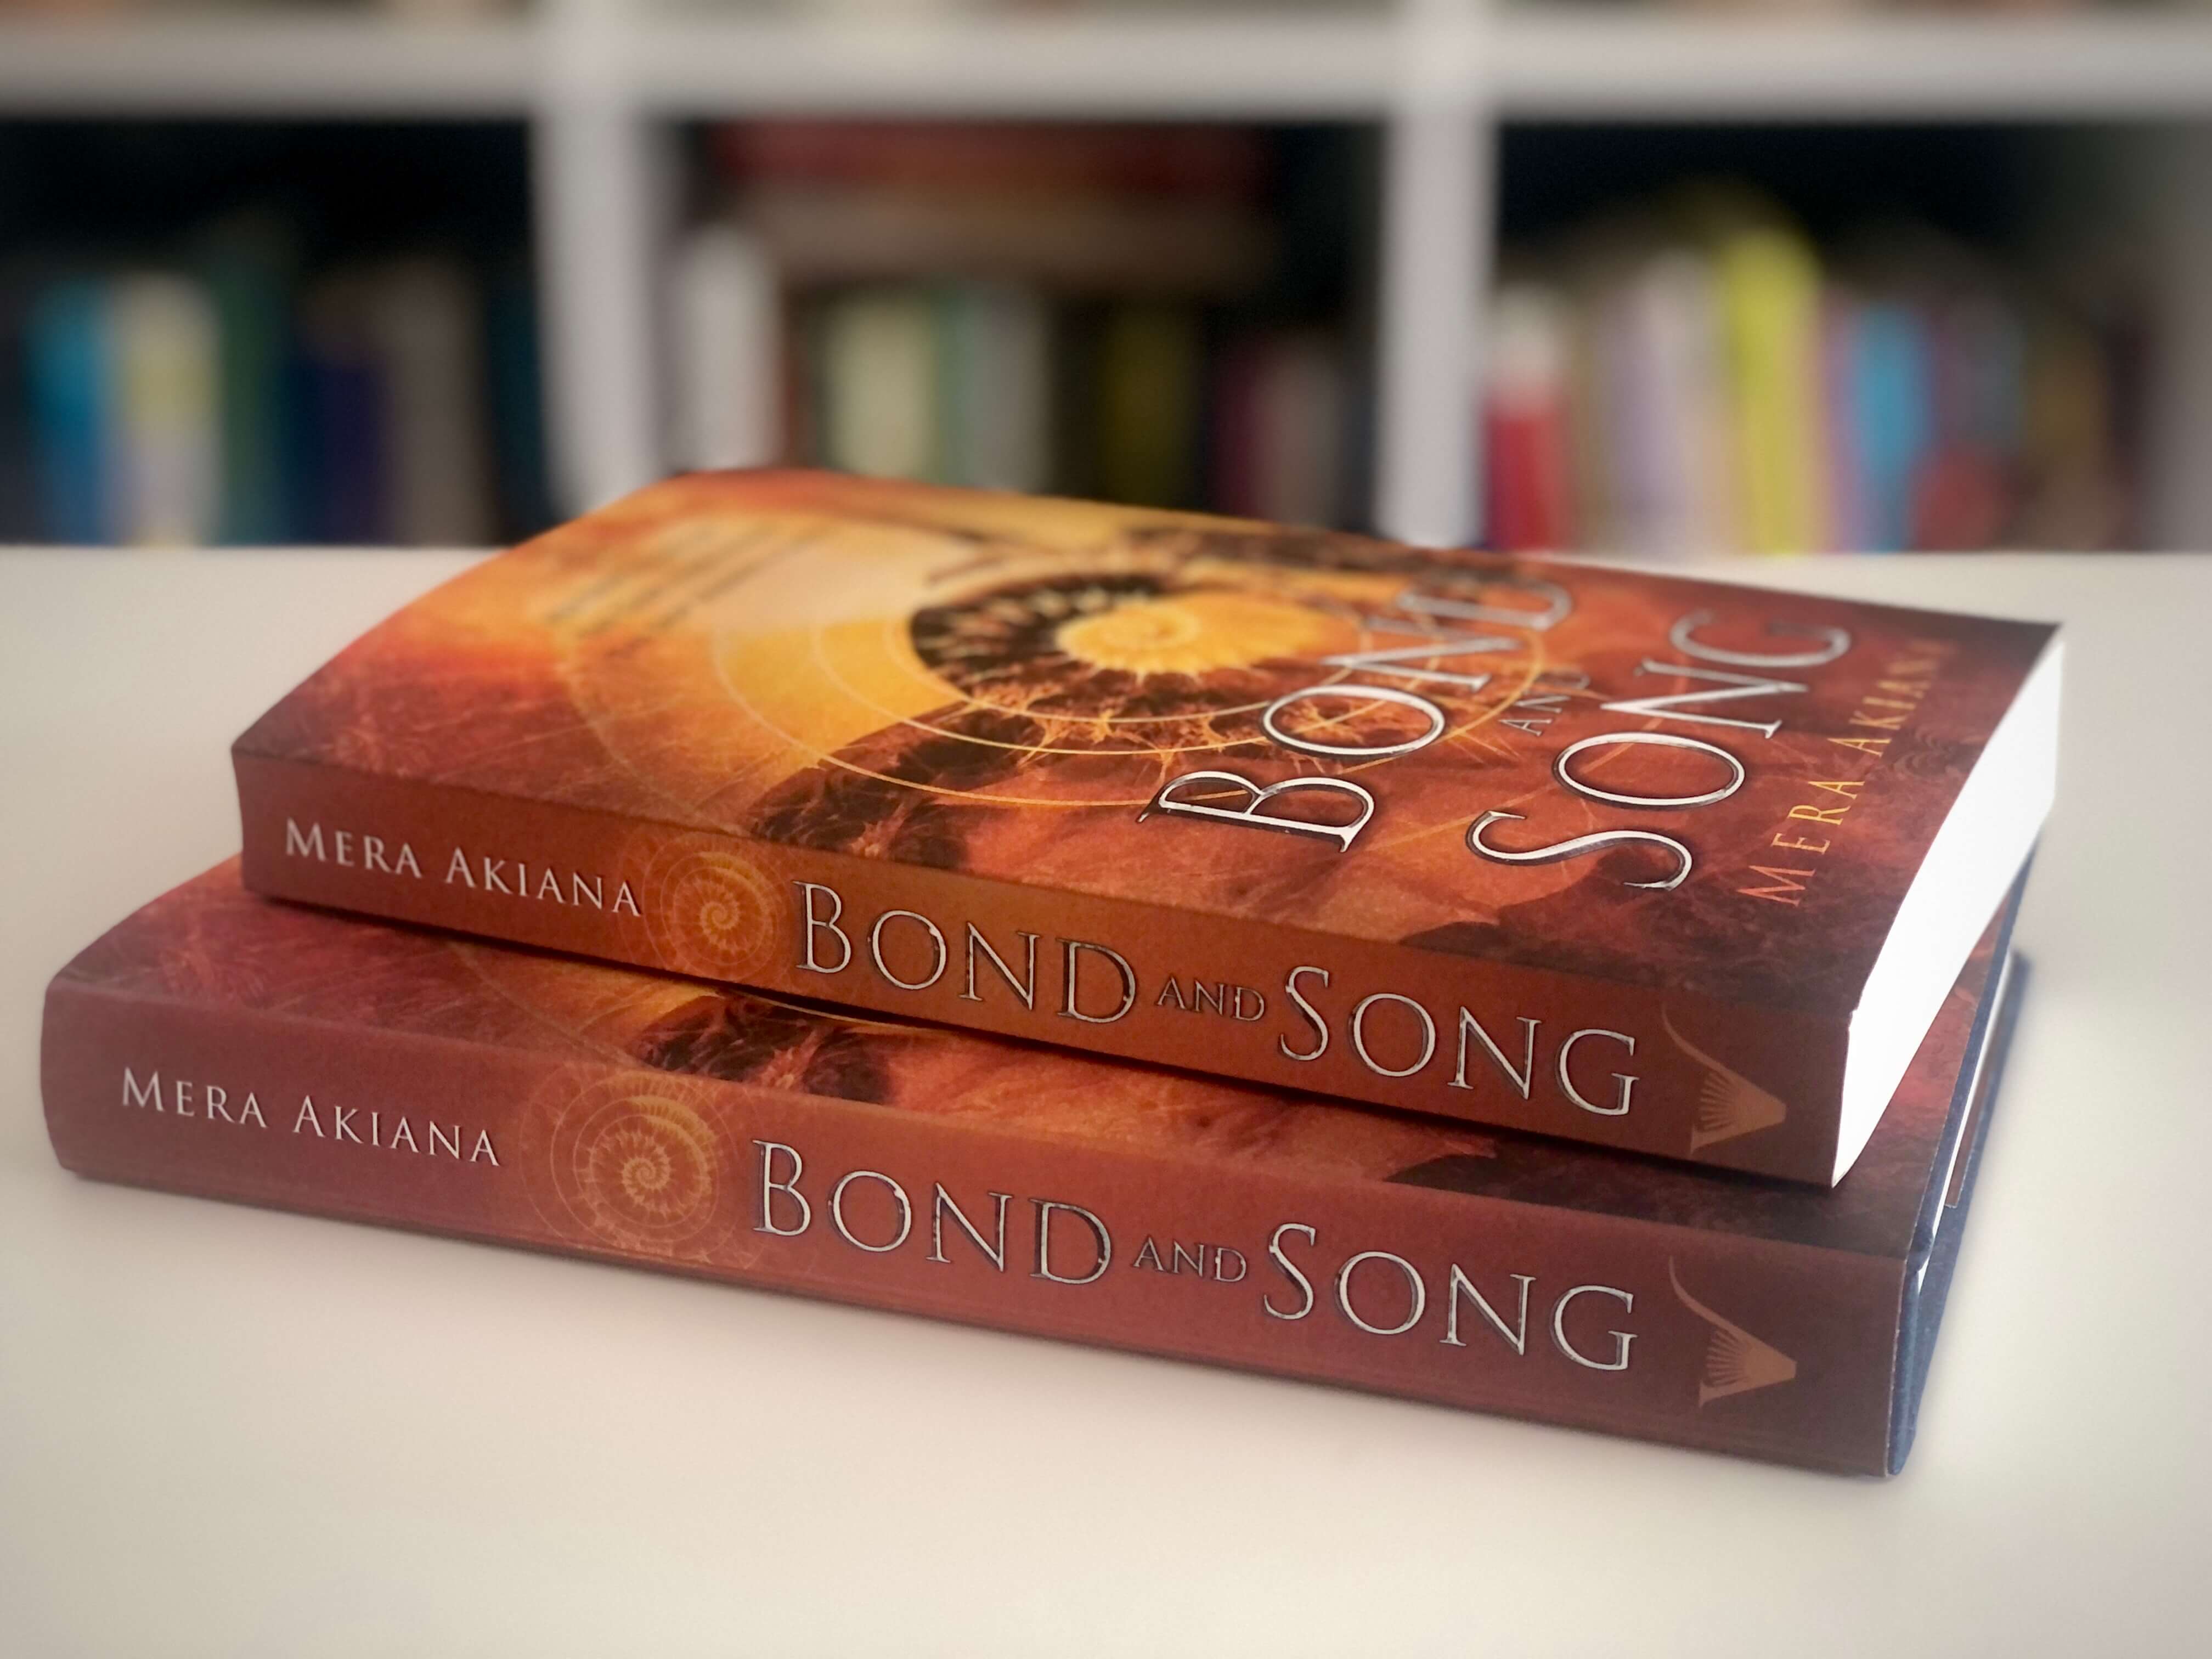 two copies of novel Bond and Song: paperback lying on top of hardcover